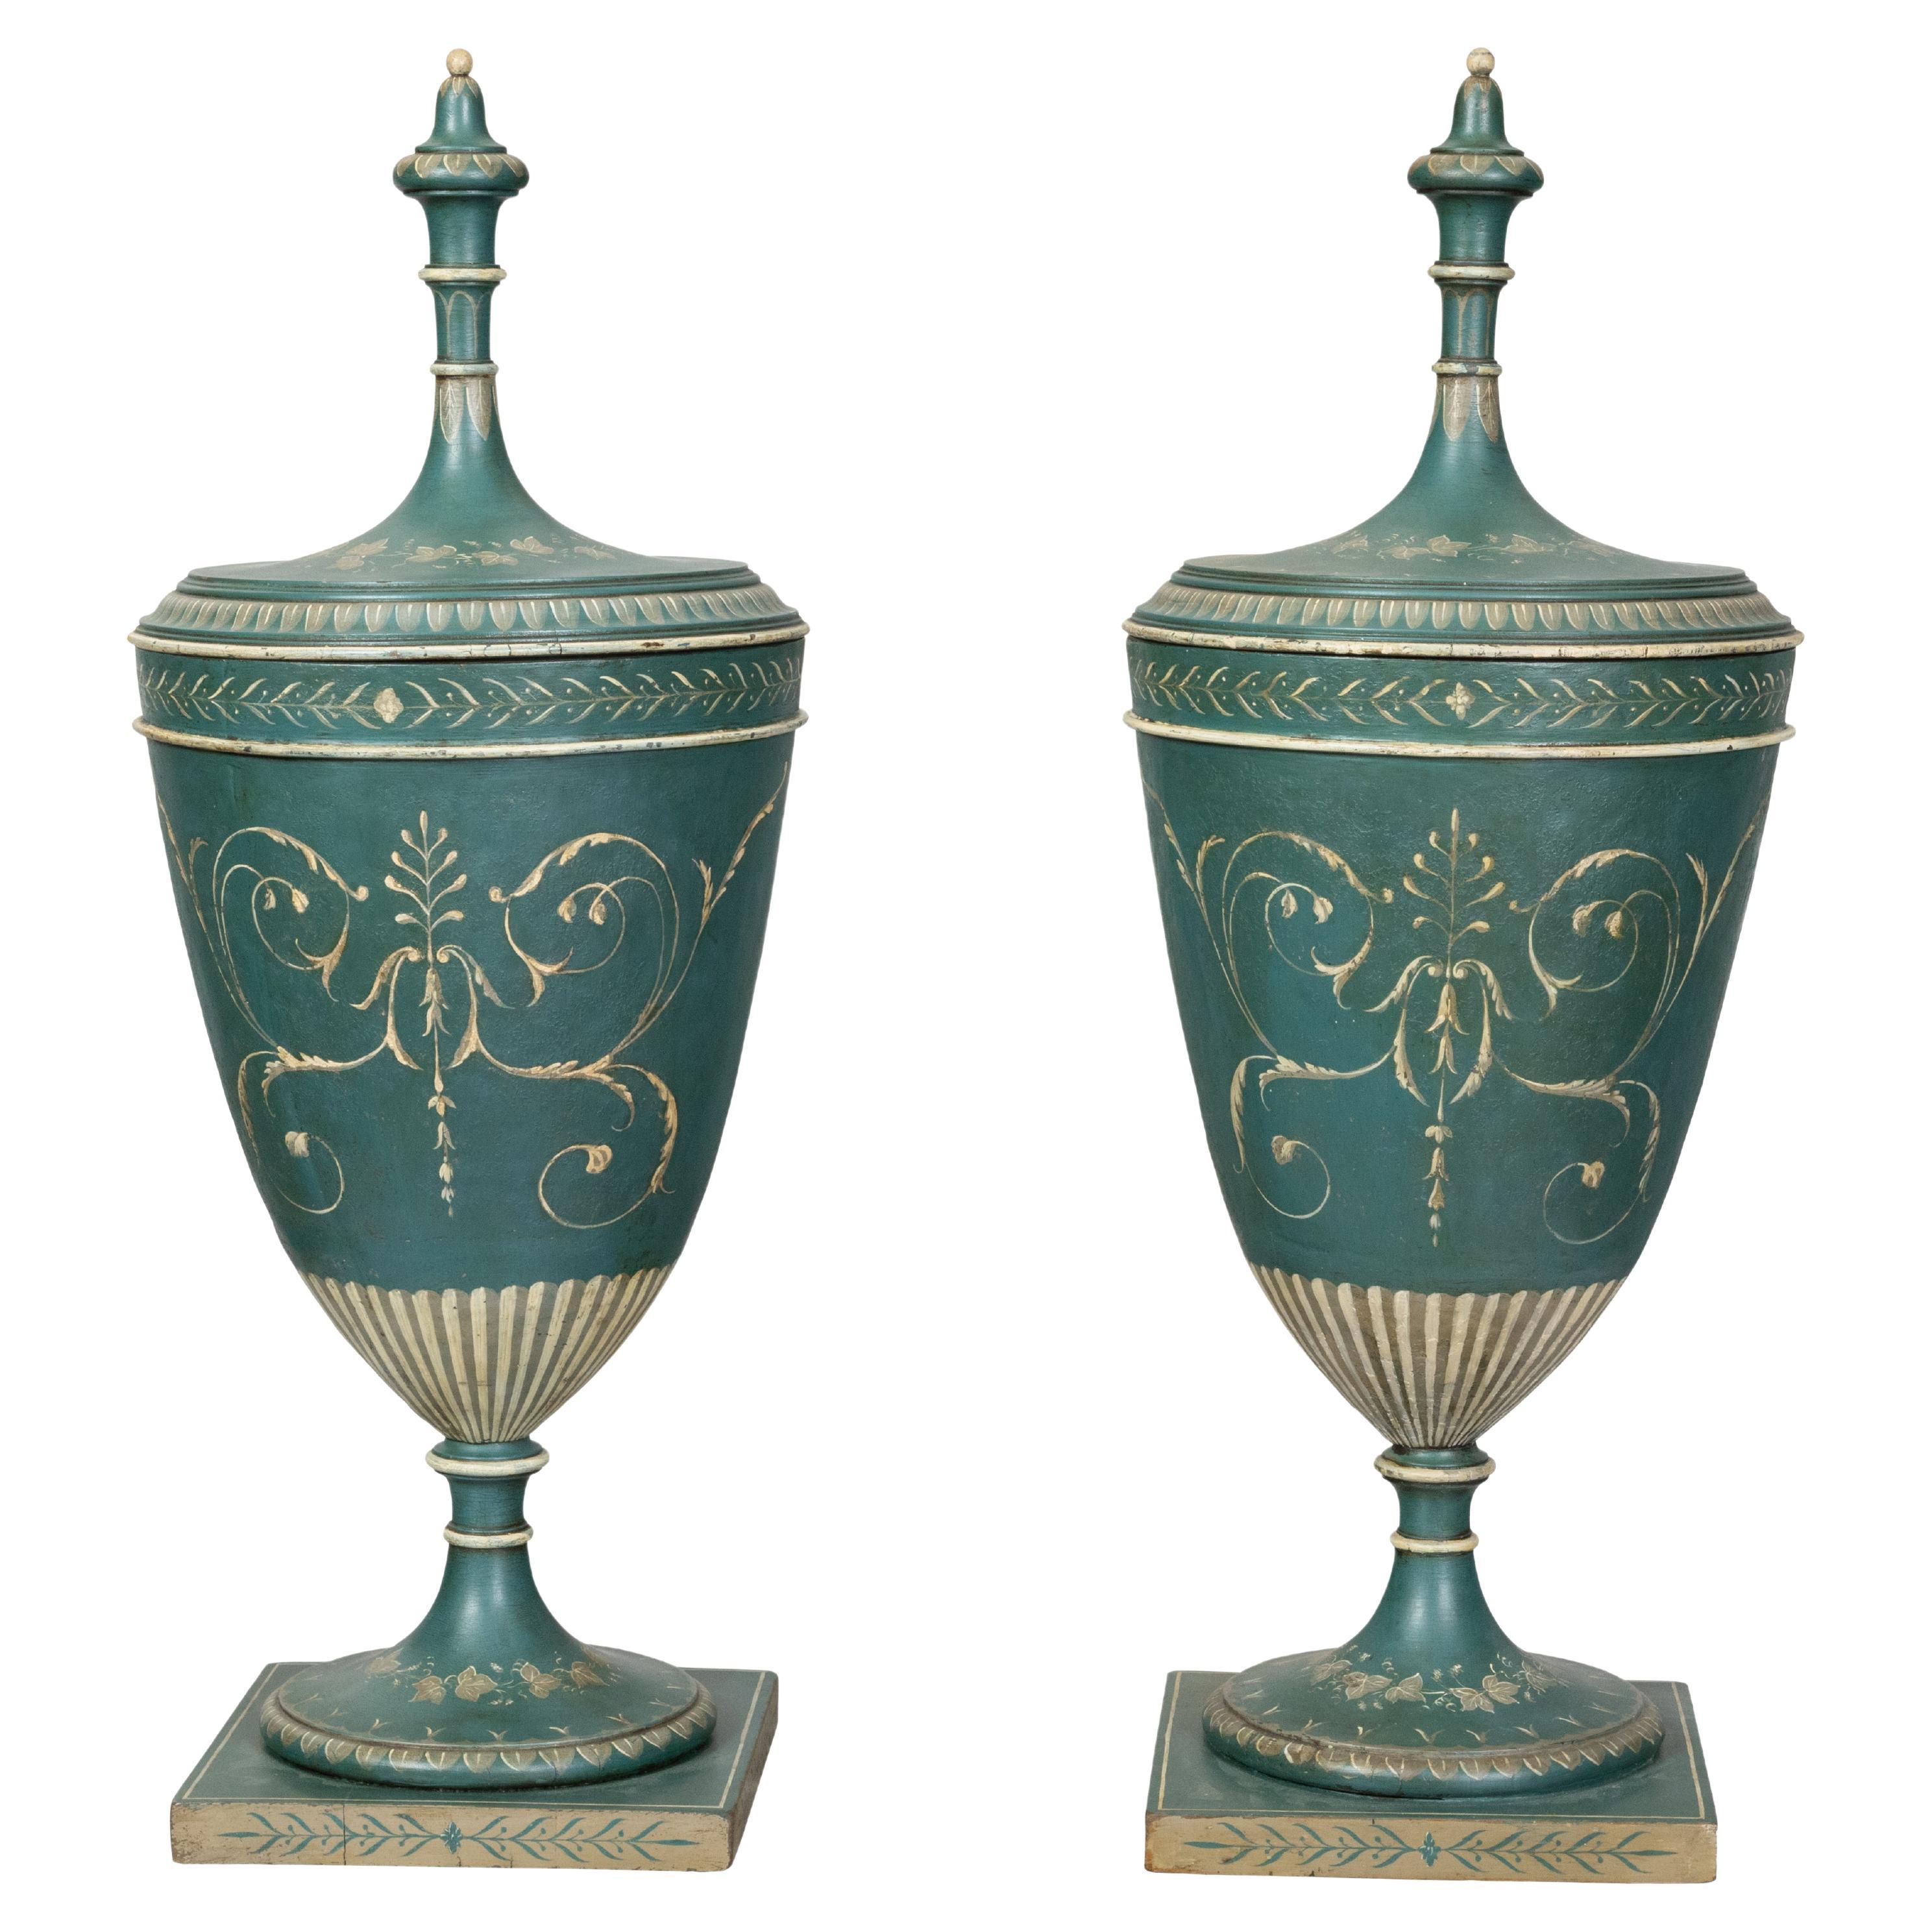 Pair of English 19th Century Neoclassical Style Green Painted Lidded Tôle Urns